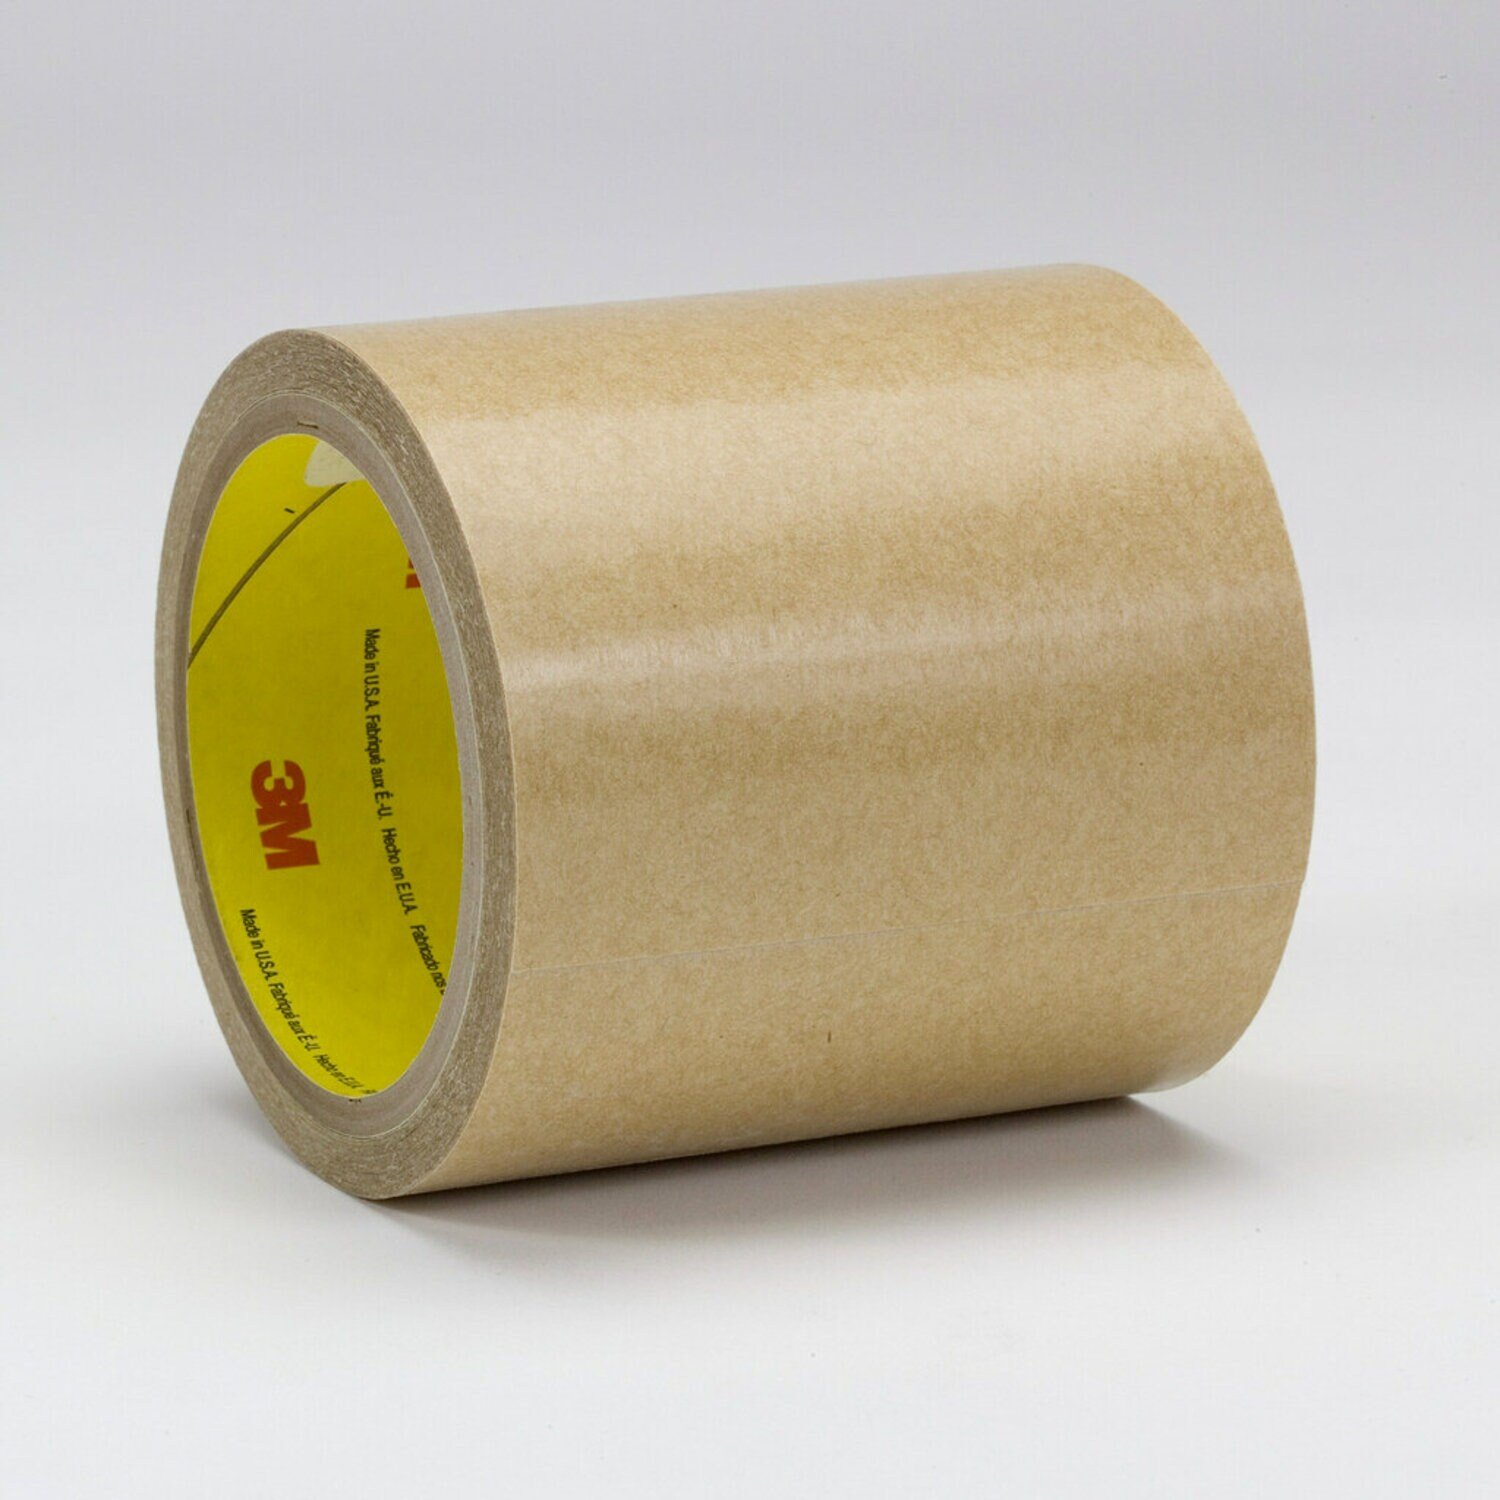 7000123357 - 3M Adhesive Transfer Tape 9672, Clear, 24 in x 180 yd, 5 mil, 1 roll
per case